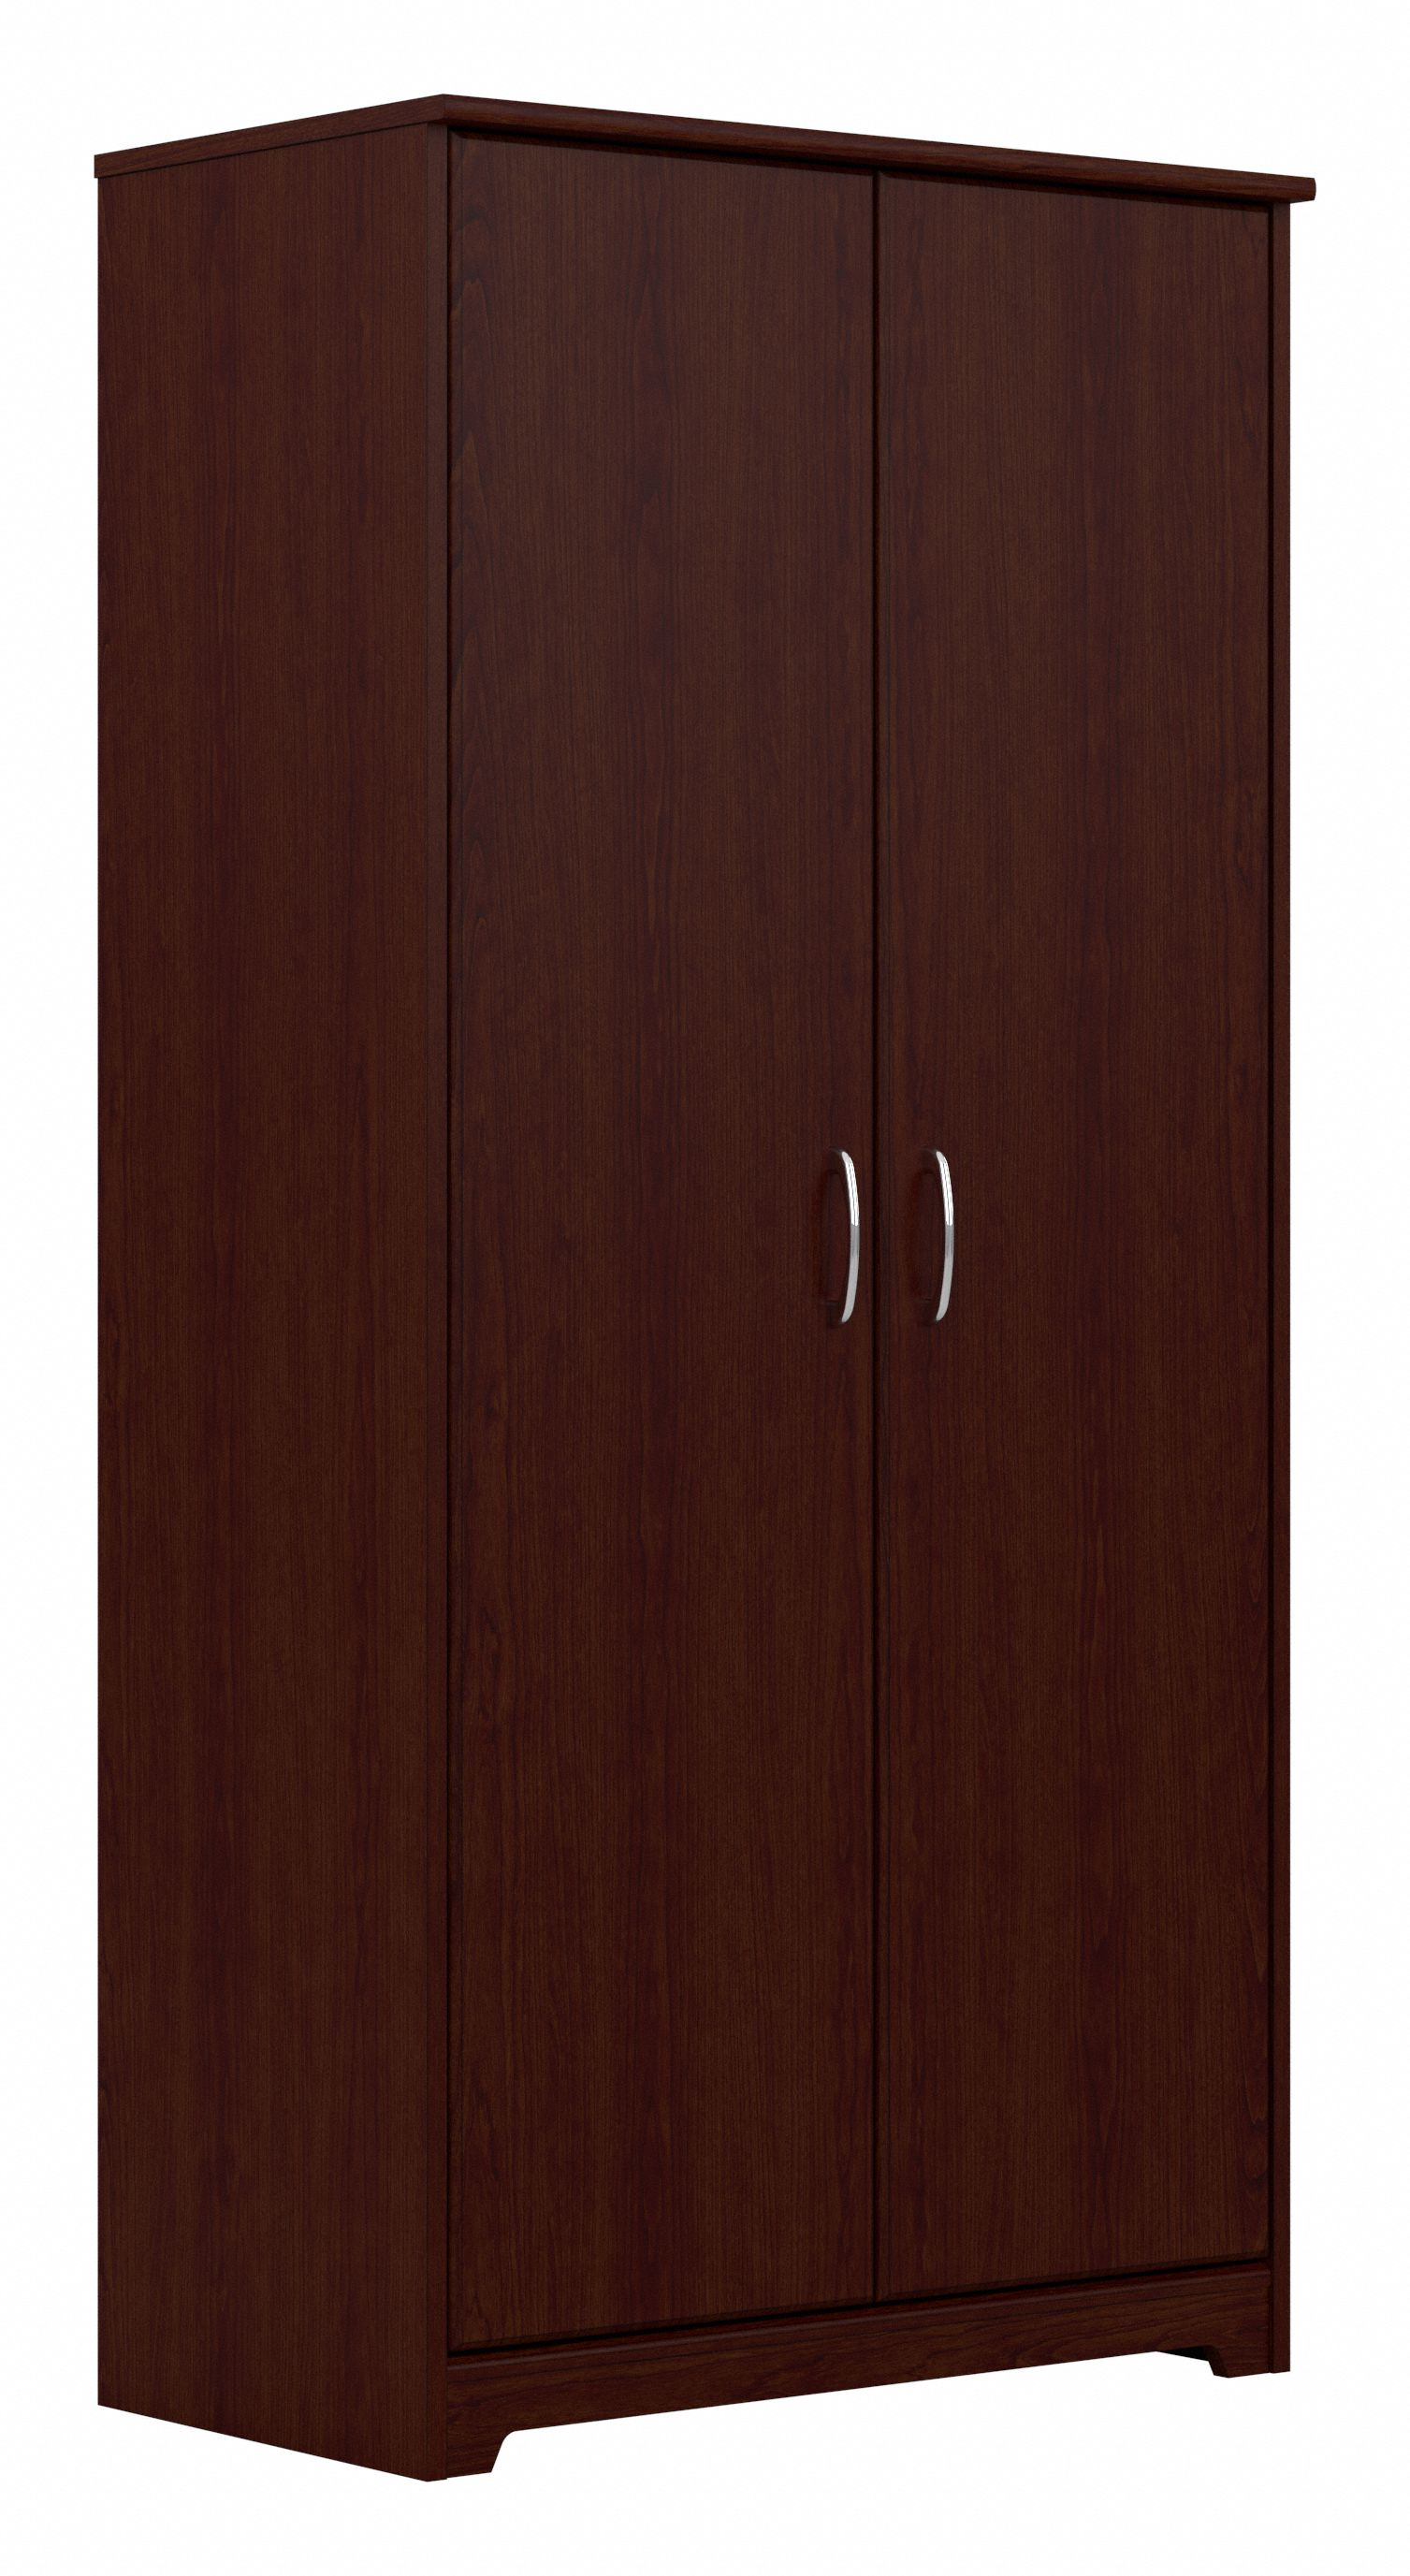 Shop Bush Furniture Cabot Tall Kitchen Pantry Cabinet with Doors 02 WC31499-Z #color_harvest cherry